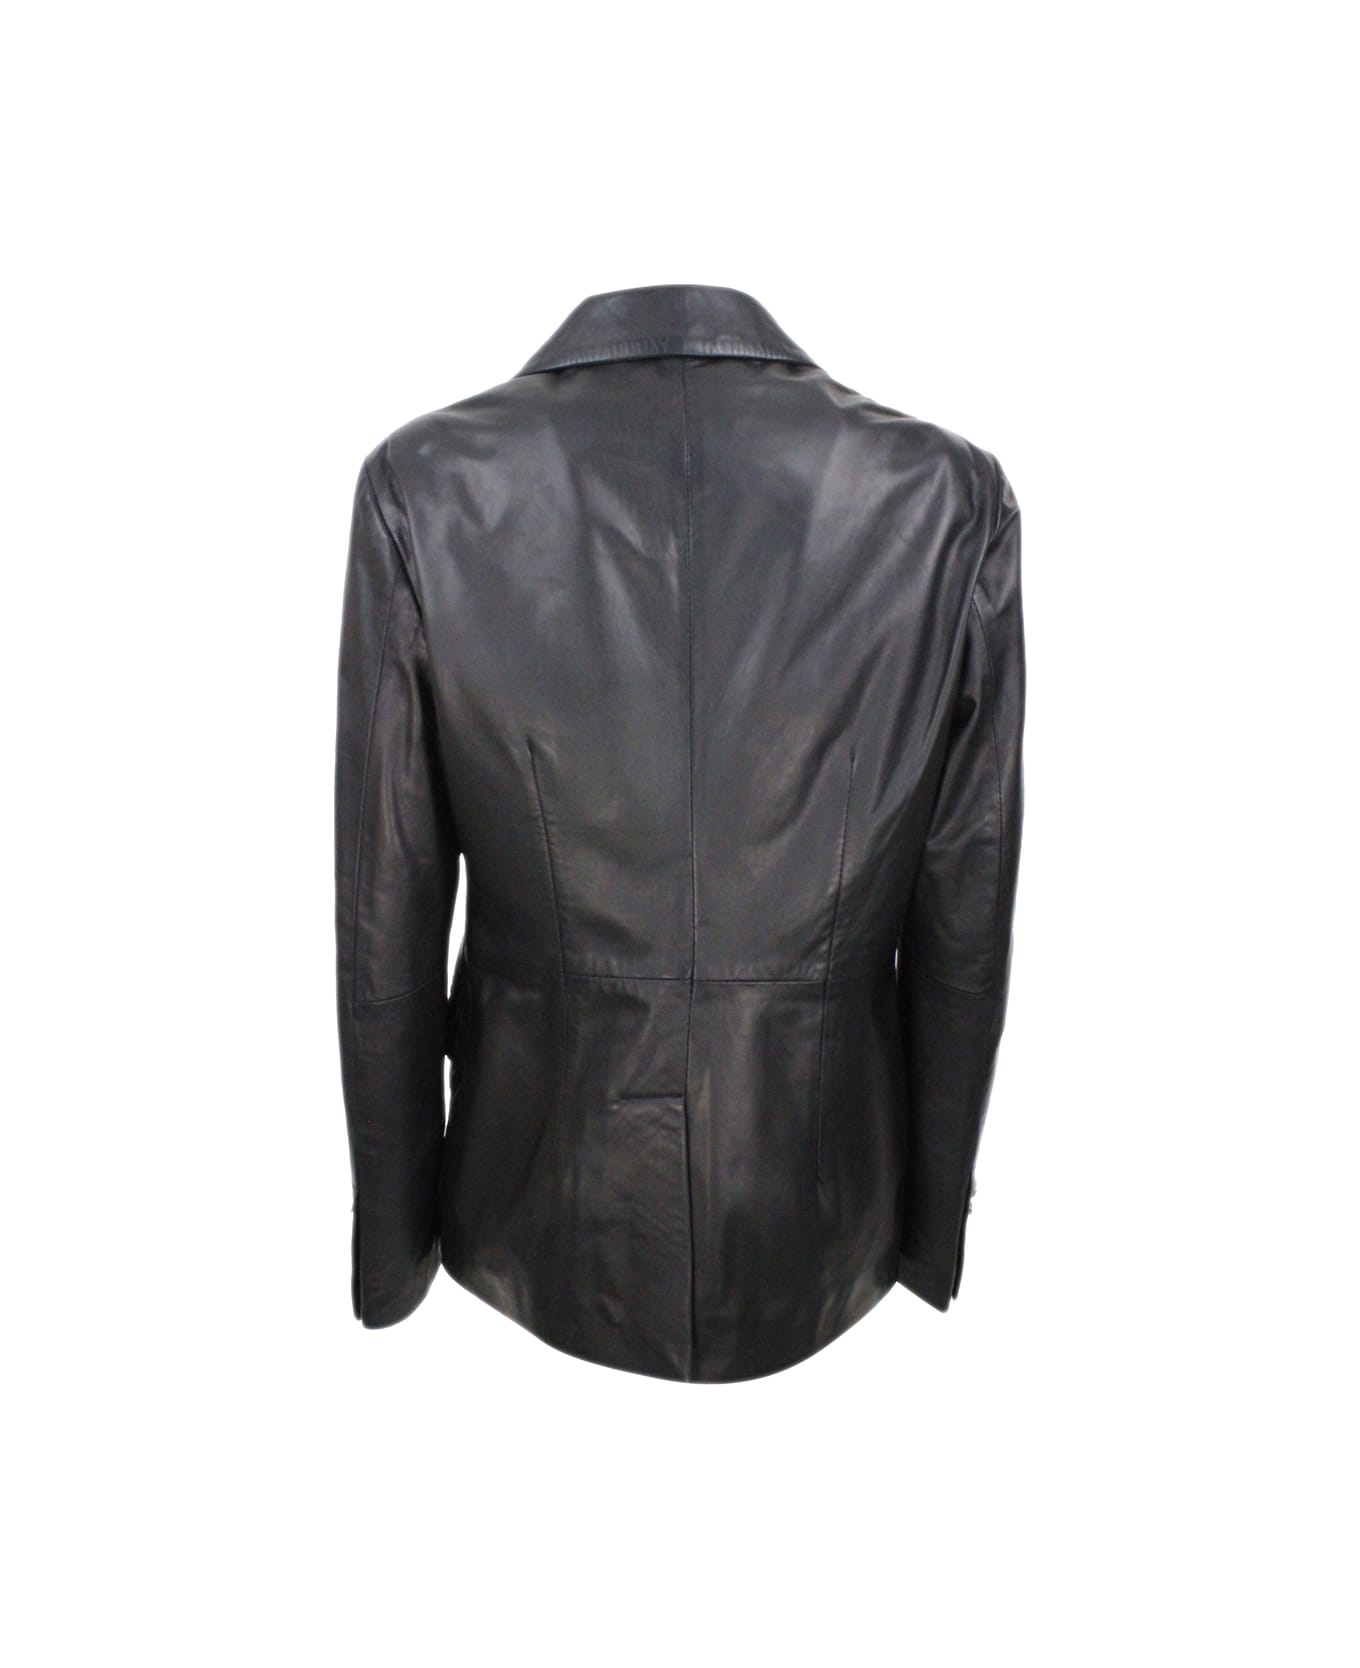 Barba Napoli Soft Leather Blazer Jacket With 2 Button Closure And Flap Pockets - Black